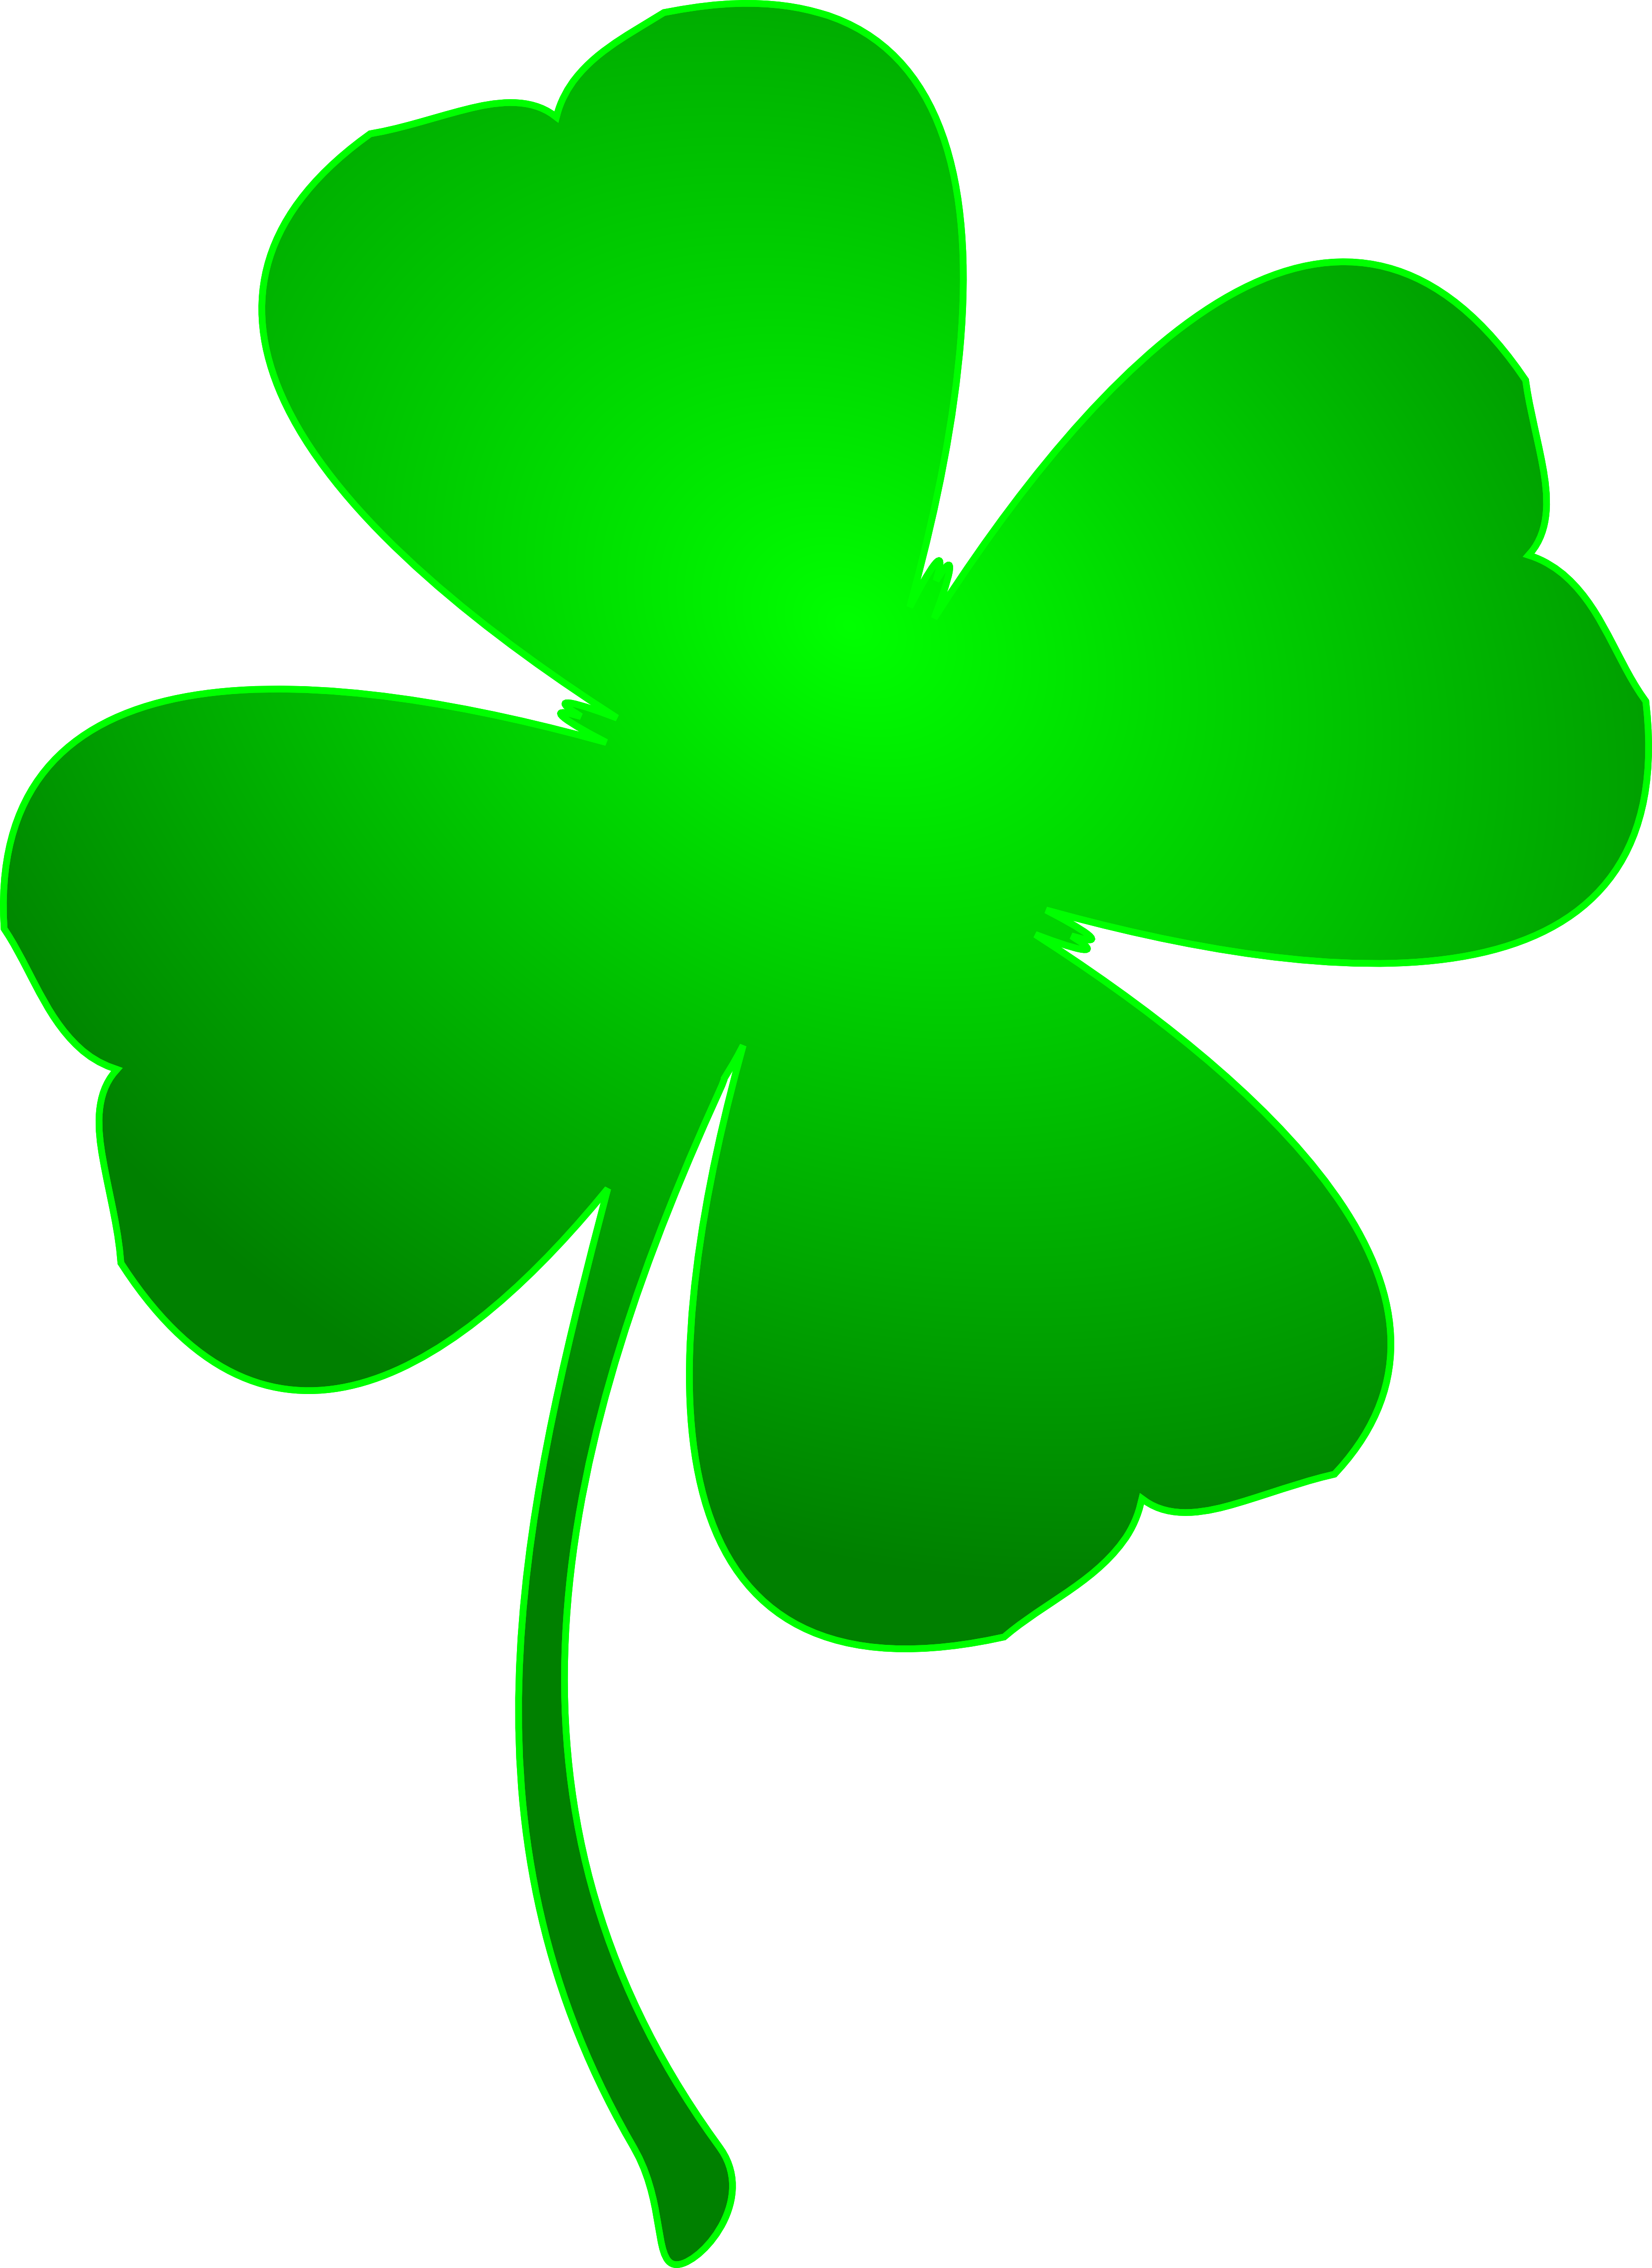 Clover PNG HD, Clover HD PNG - Free PNG